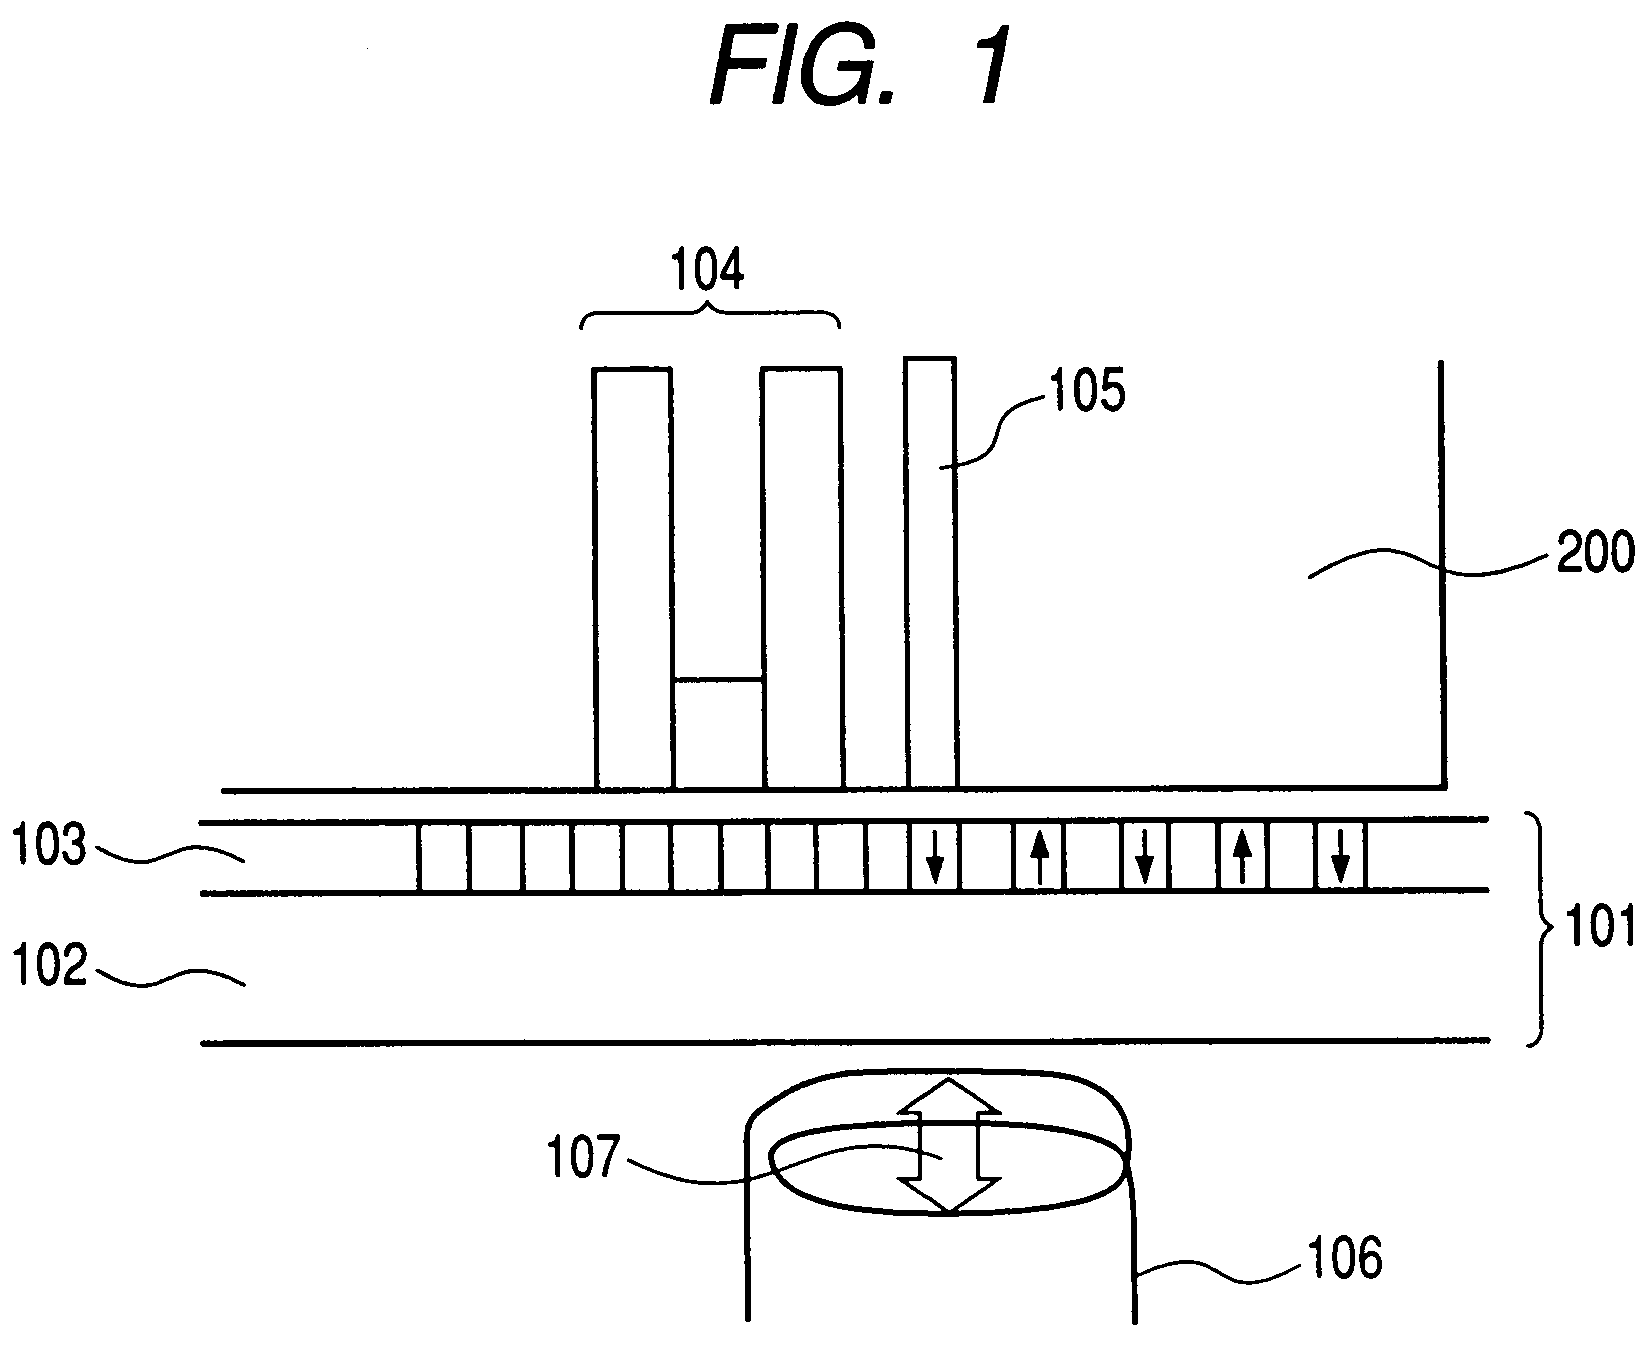 Magnetic recording device